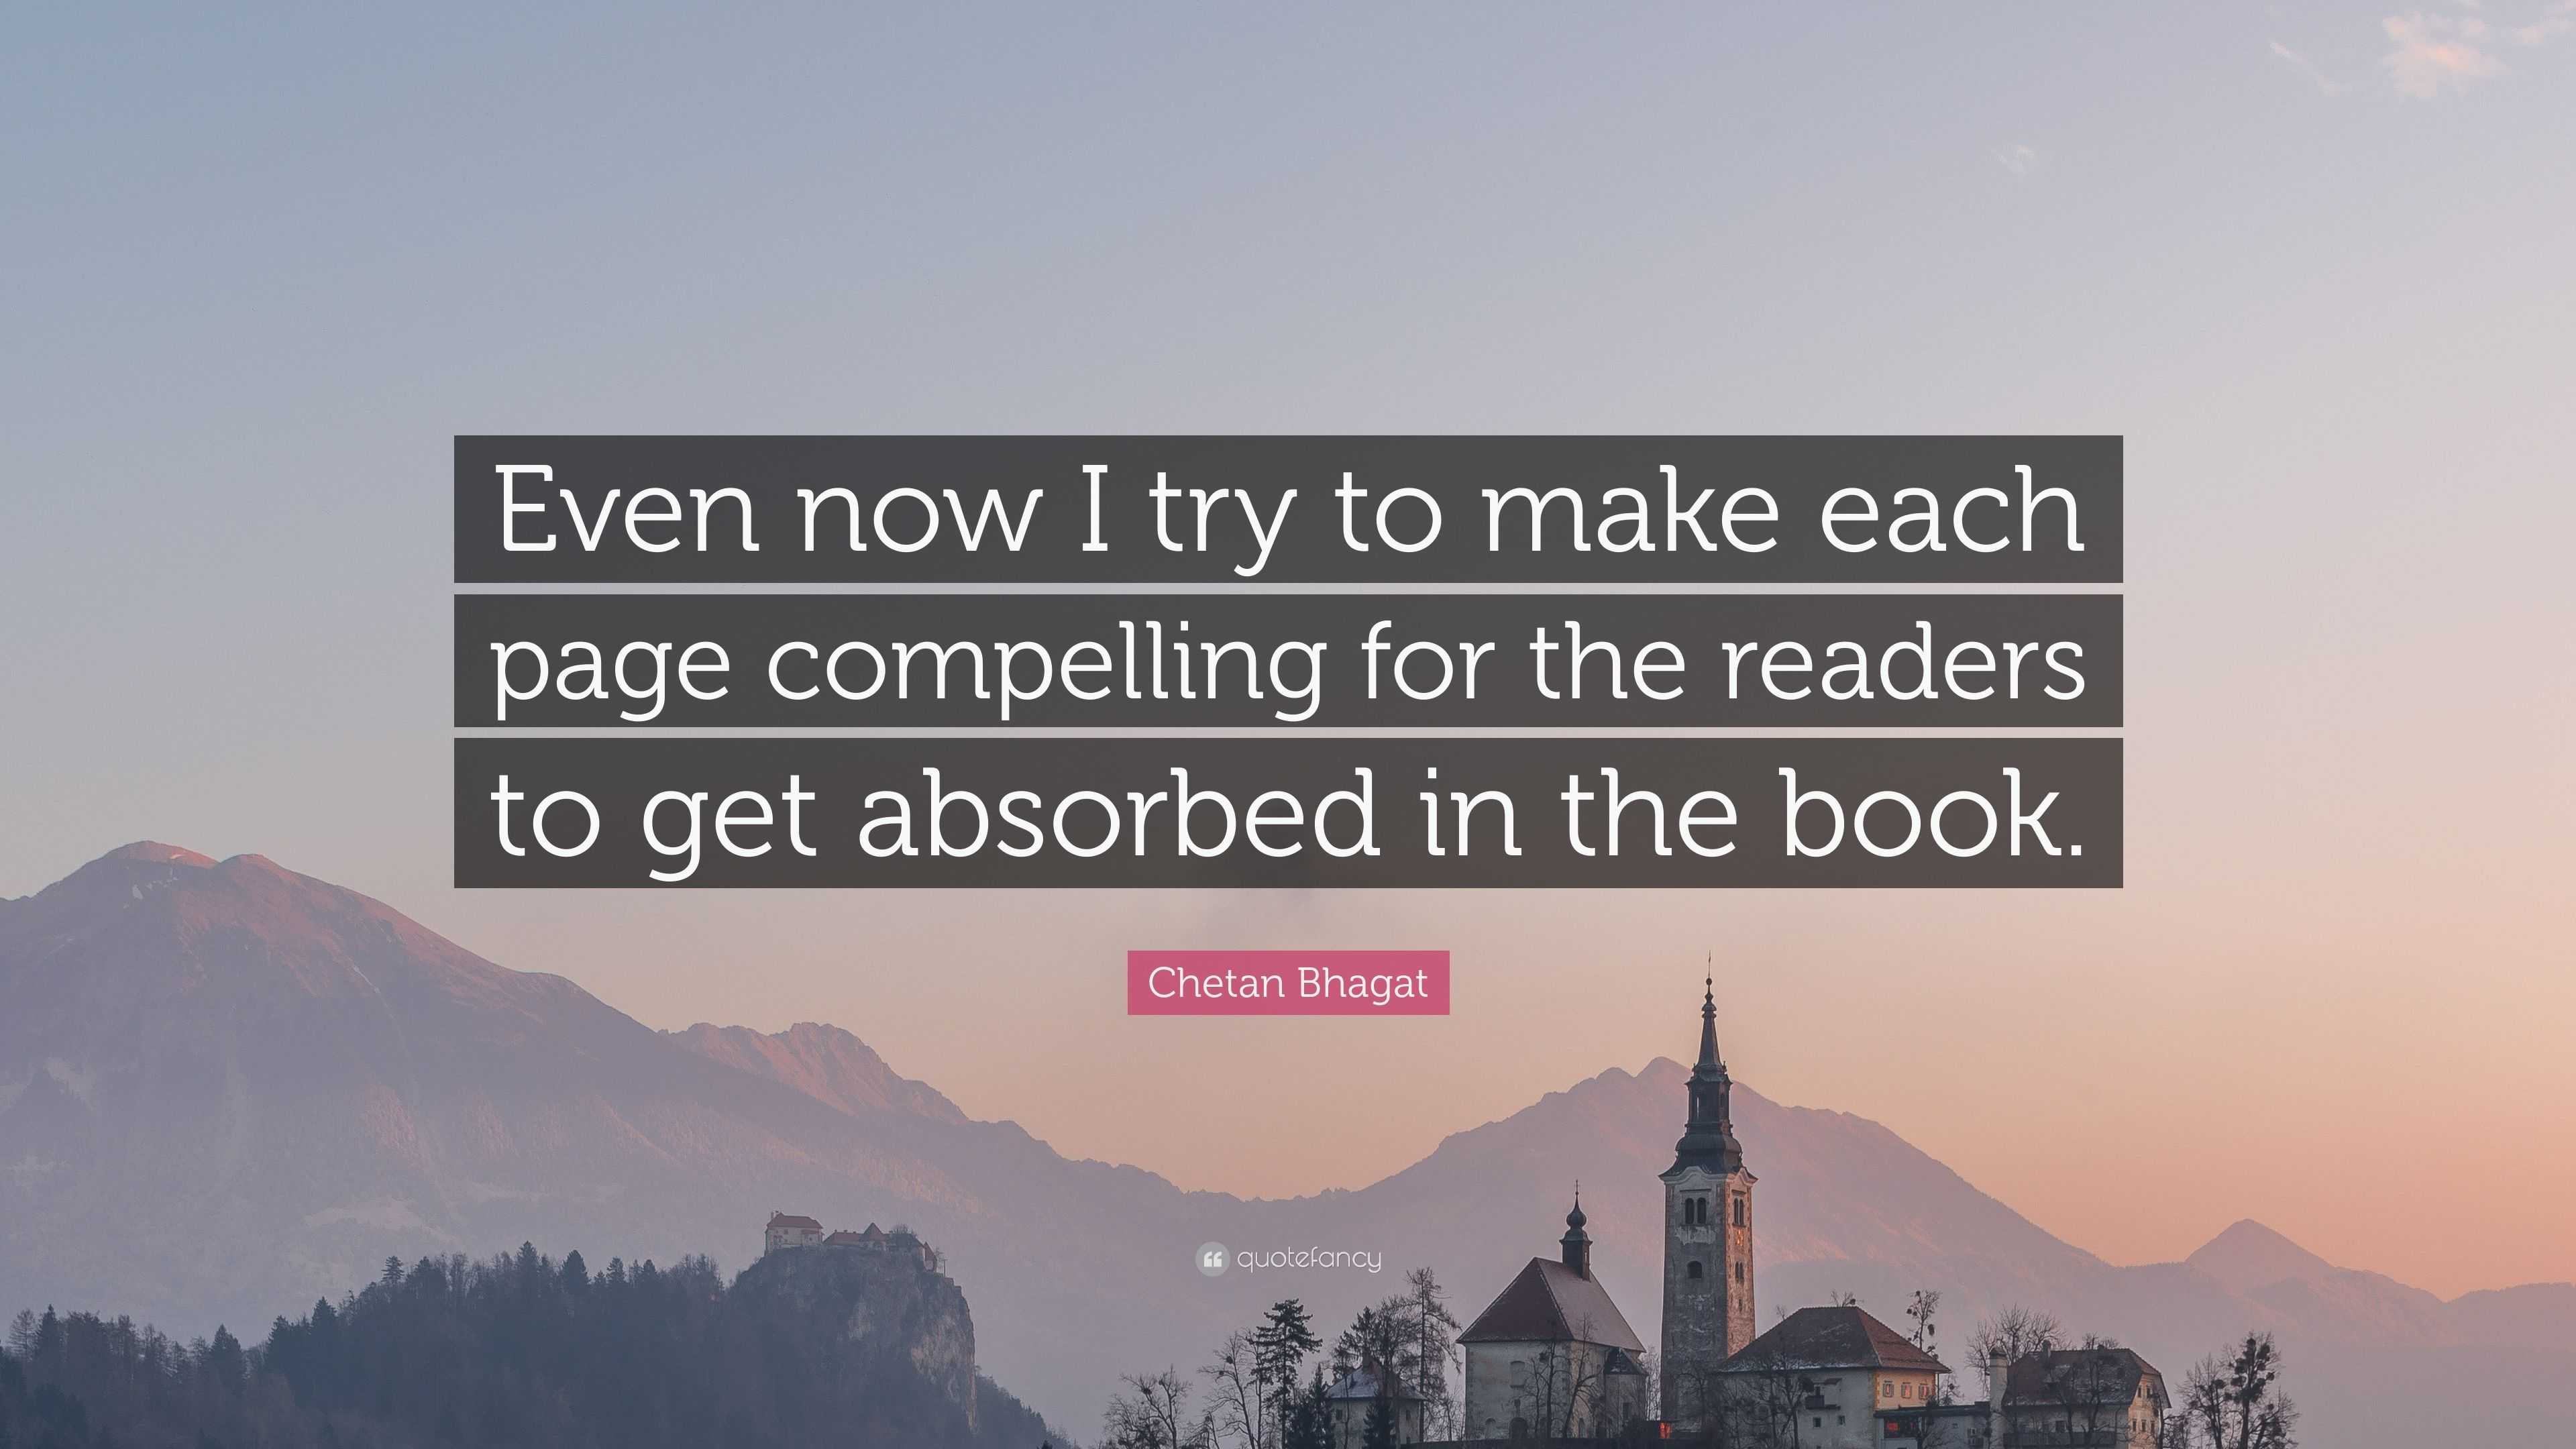 Chetan Bhagat Quote: “Even now I try to make each page compelling for ...